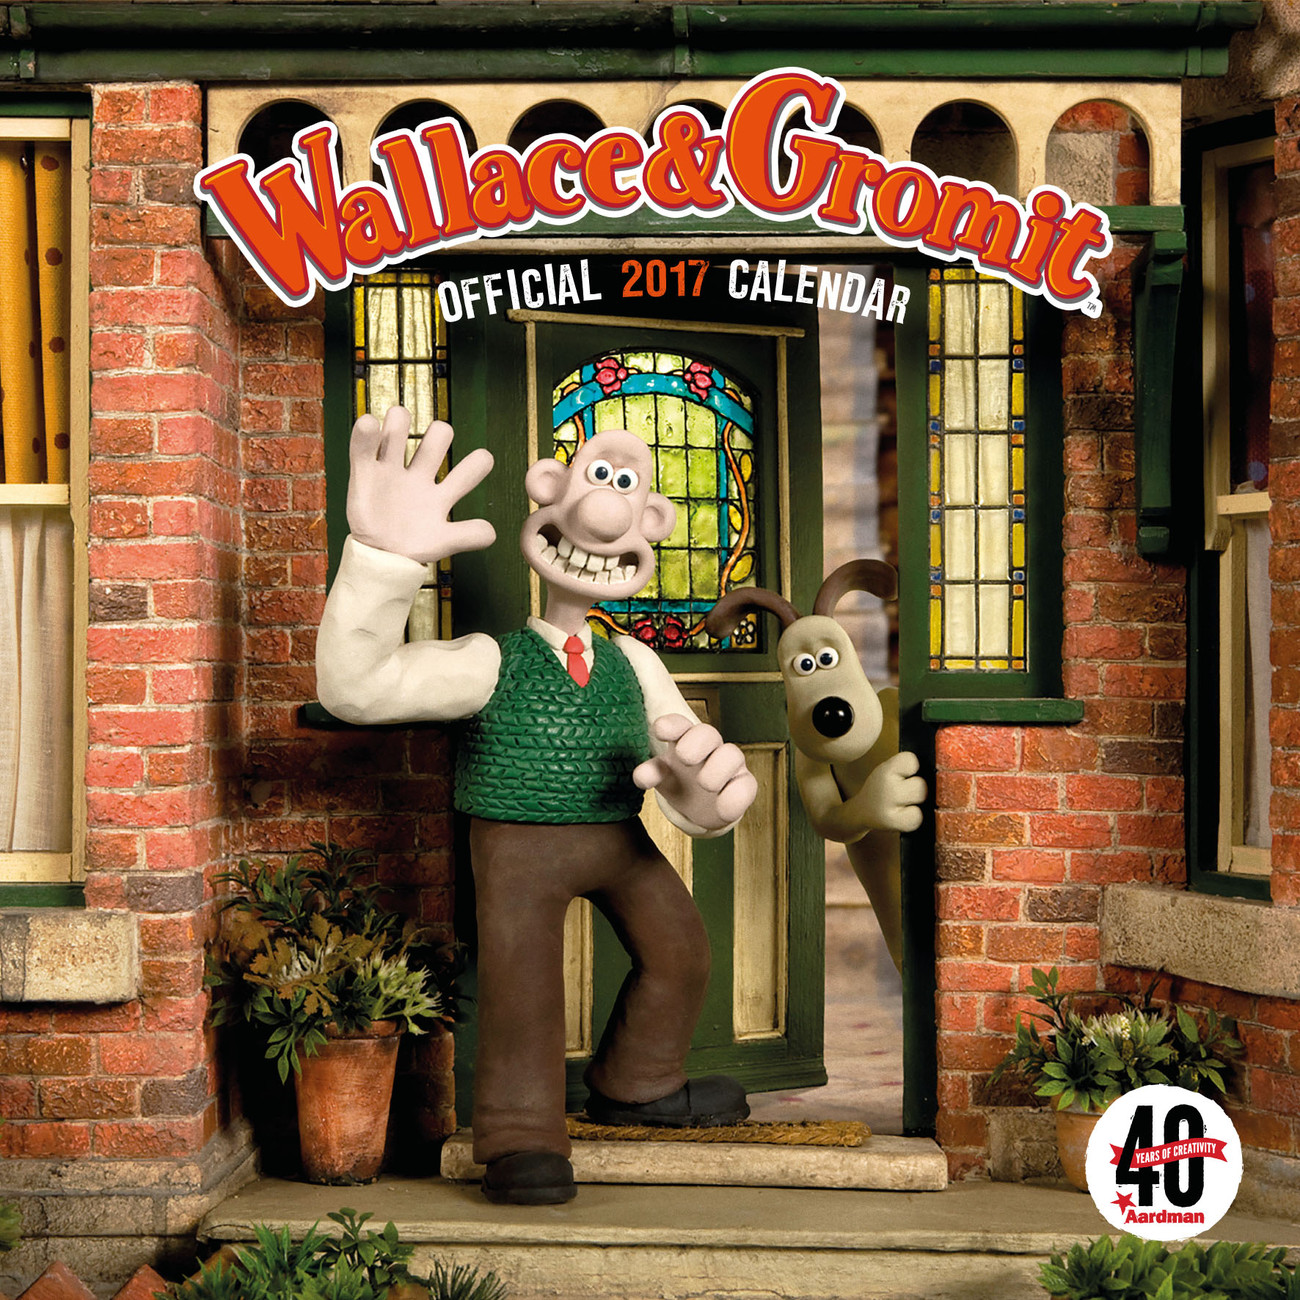 wallace-gromit-aasrdman-40th-calendars-2021-on-ukposters-ukposters